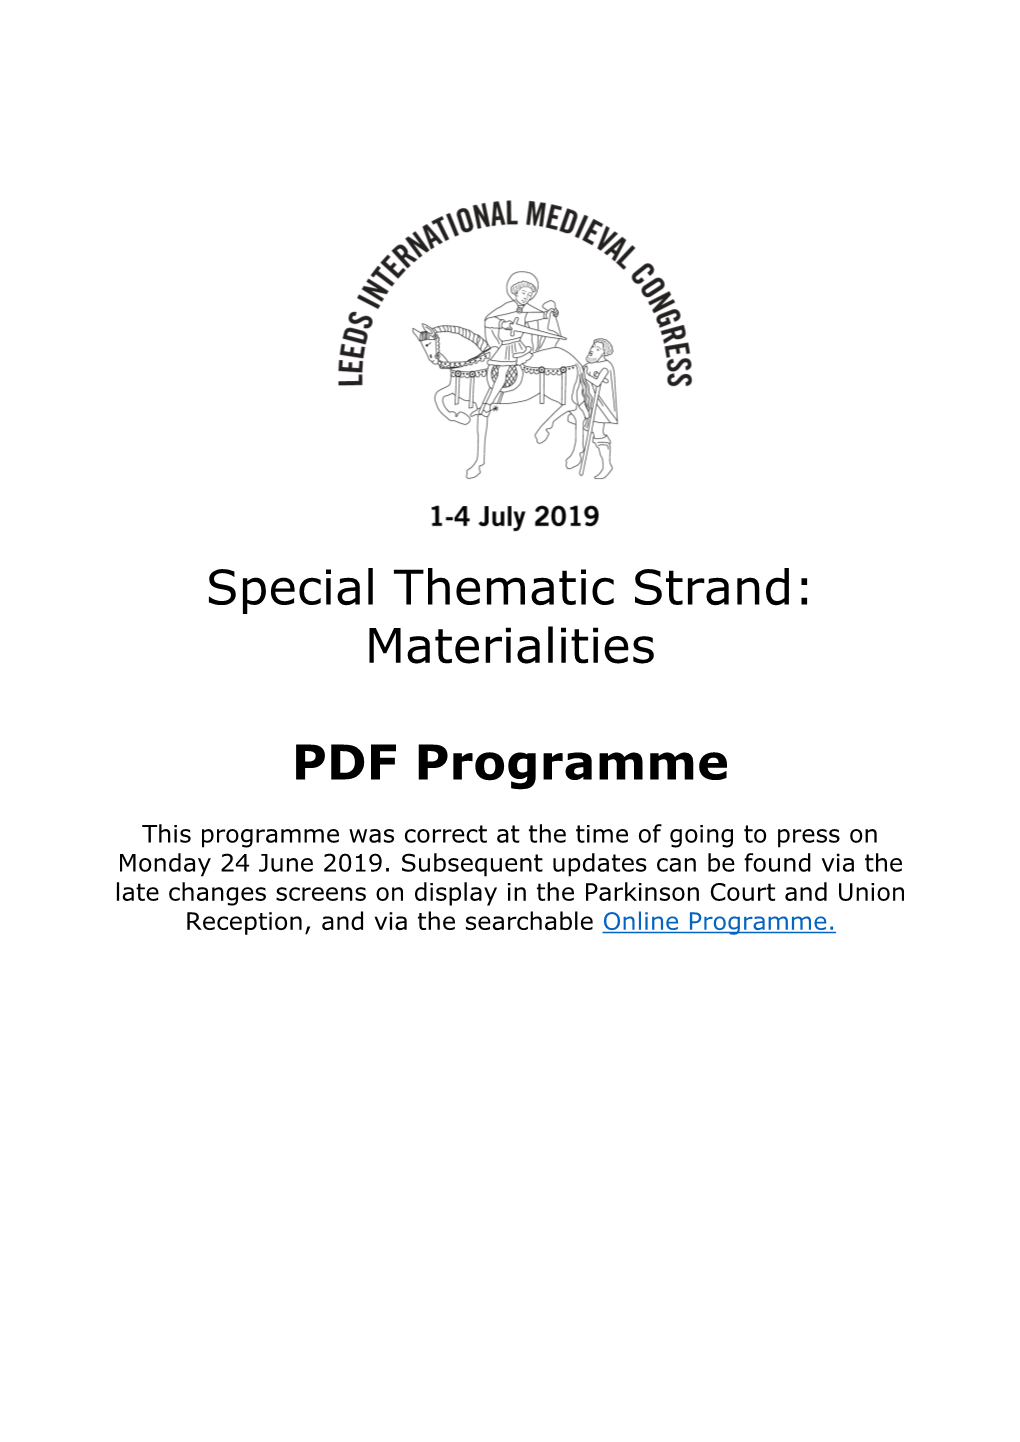 Special Thematic Strand: Materialities PDF Programme